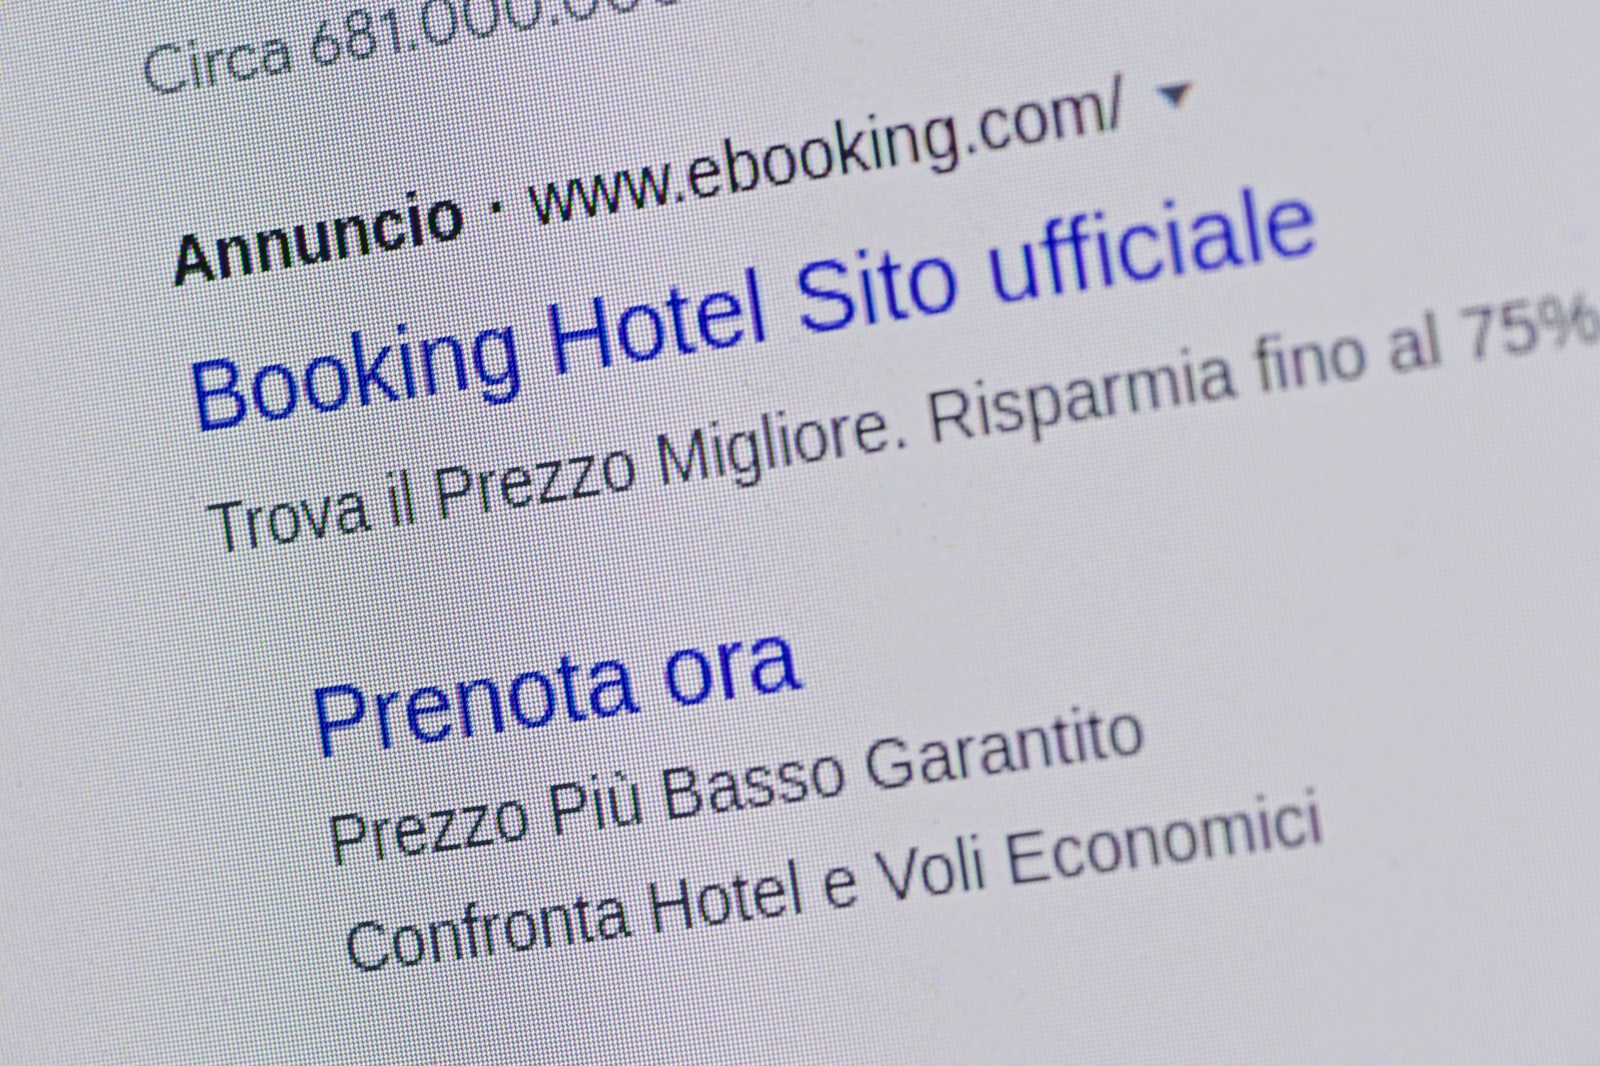 The home page of the online reservation platform Booking.com is pictured on the screen of a computer on June 10, 2021 in Milan.
 The online reservation platform Booking.com is suspected of having avoided 150 million euros ($182 million) in value-added tax in Italy, financial police in Genoa said on June 10, 2021.,Image: 615088437, License: Rights-managed, Restrictions: , Model Release: no, Credit line: MIGUEL MEDINA / AFP / Profimedia